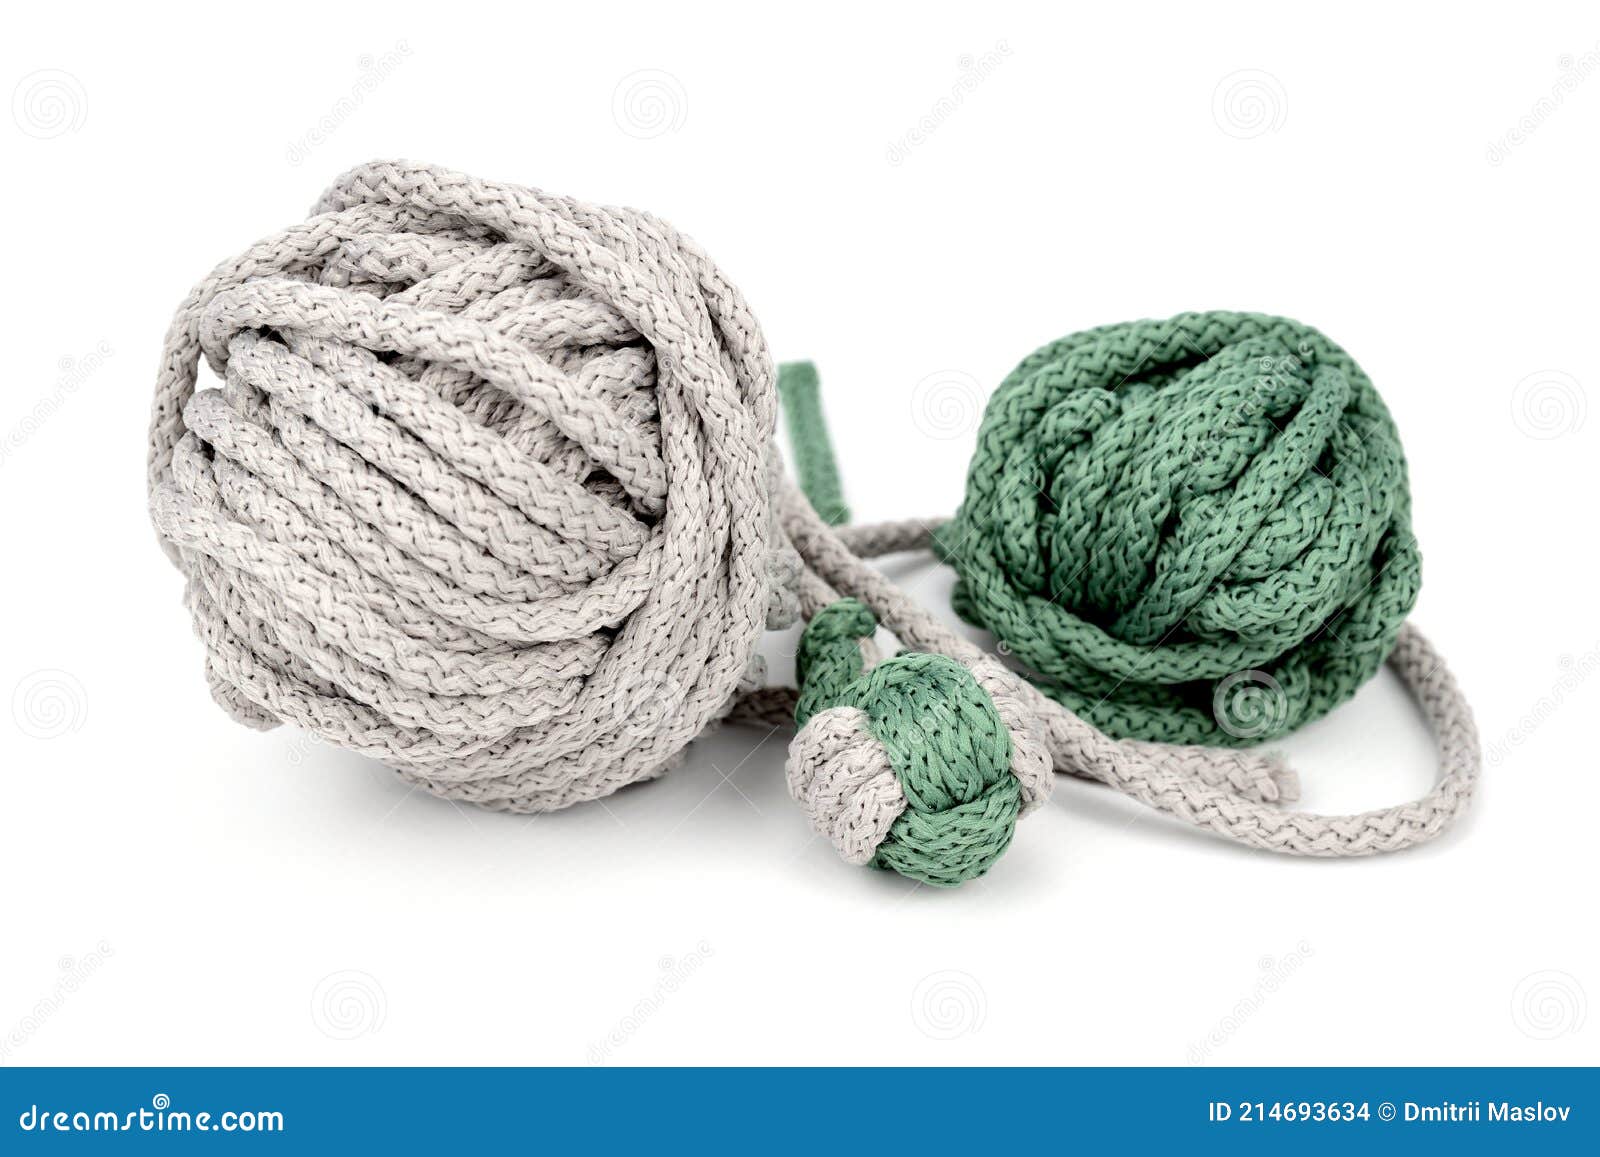 Two Skeins of Paracord, Gray and Green, and a Thick Knot Woven of